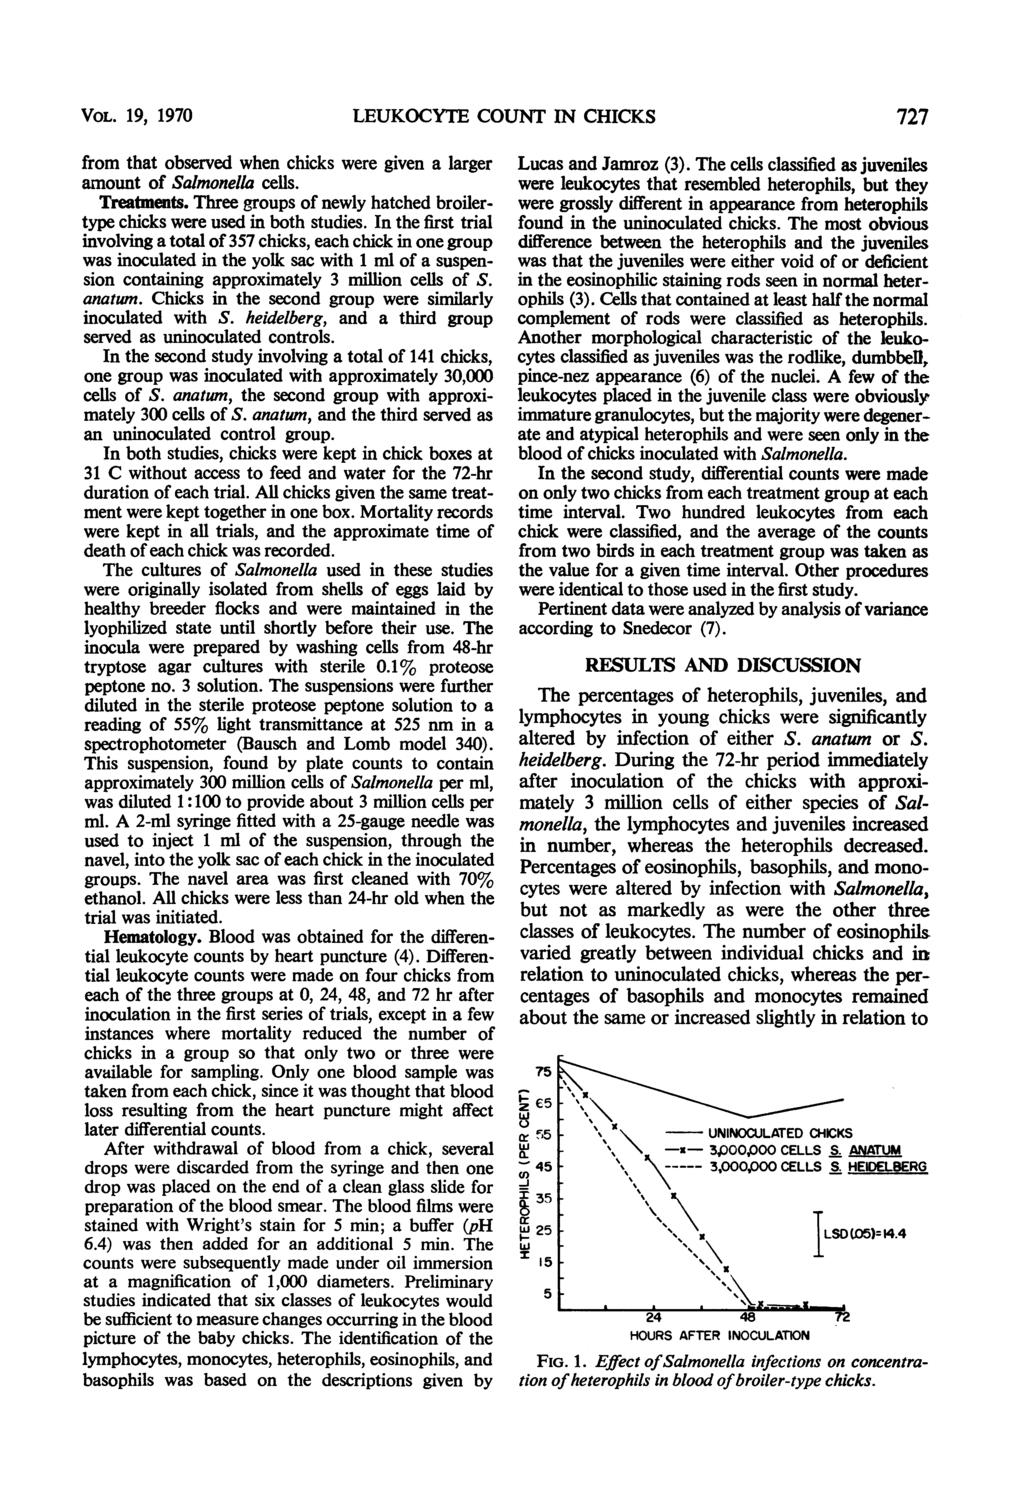 VOL. 19, 1970 LEUKOCYTE COUNT N CHCKS 727 from that observed when chicks were given a larger amount of Salmonella cells. Treatments.